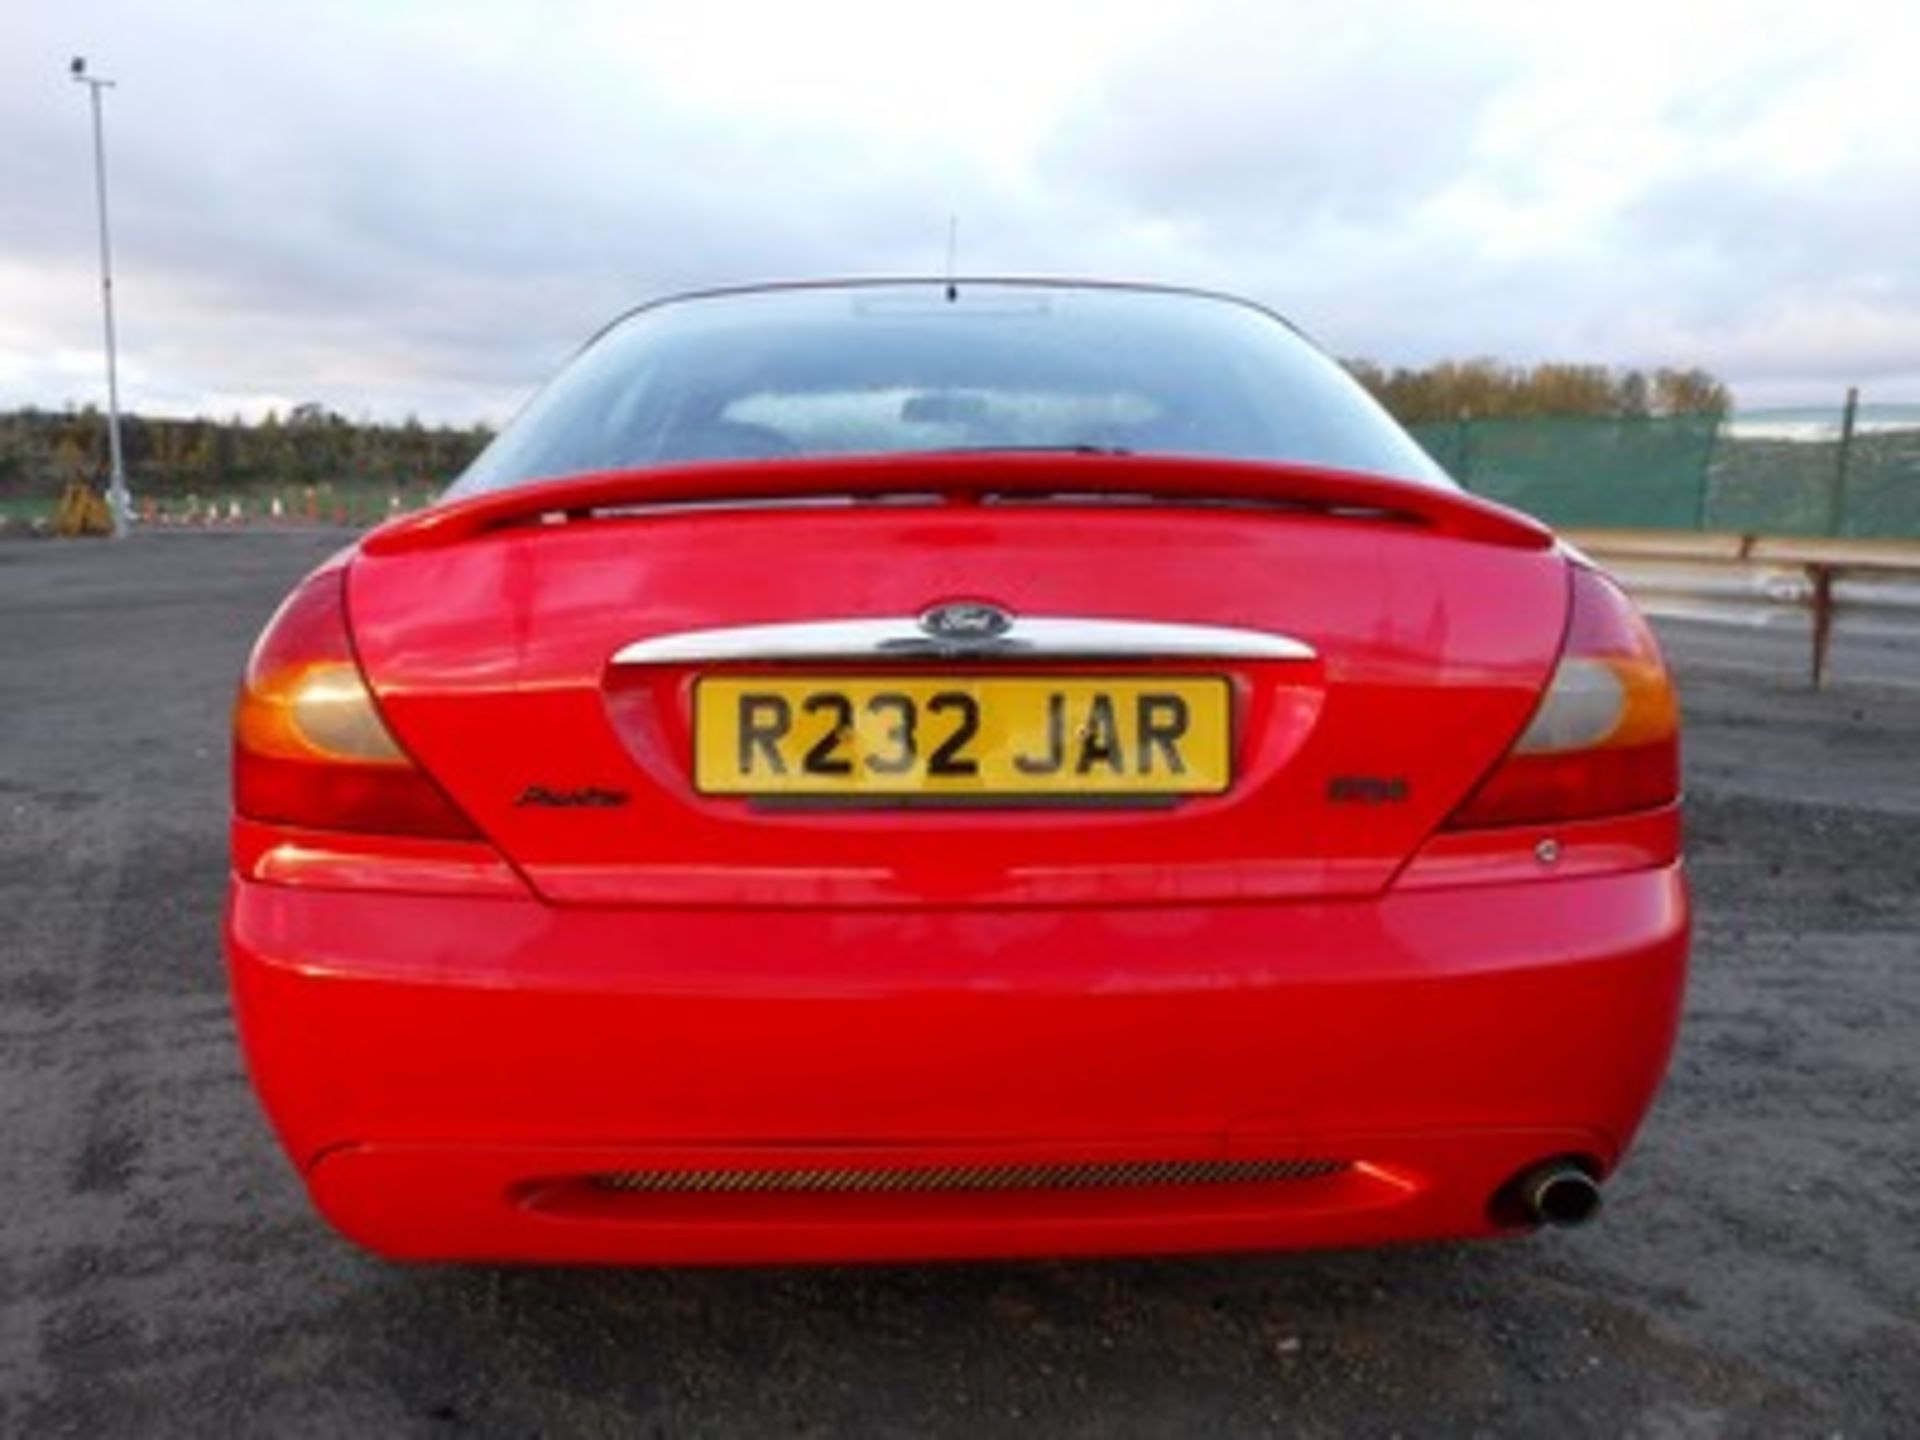 FORD MONDEO ST 24 V6 - 2497cc - Image 15 of 24